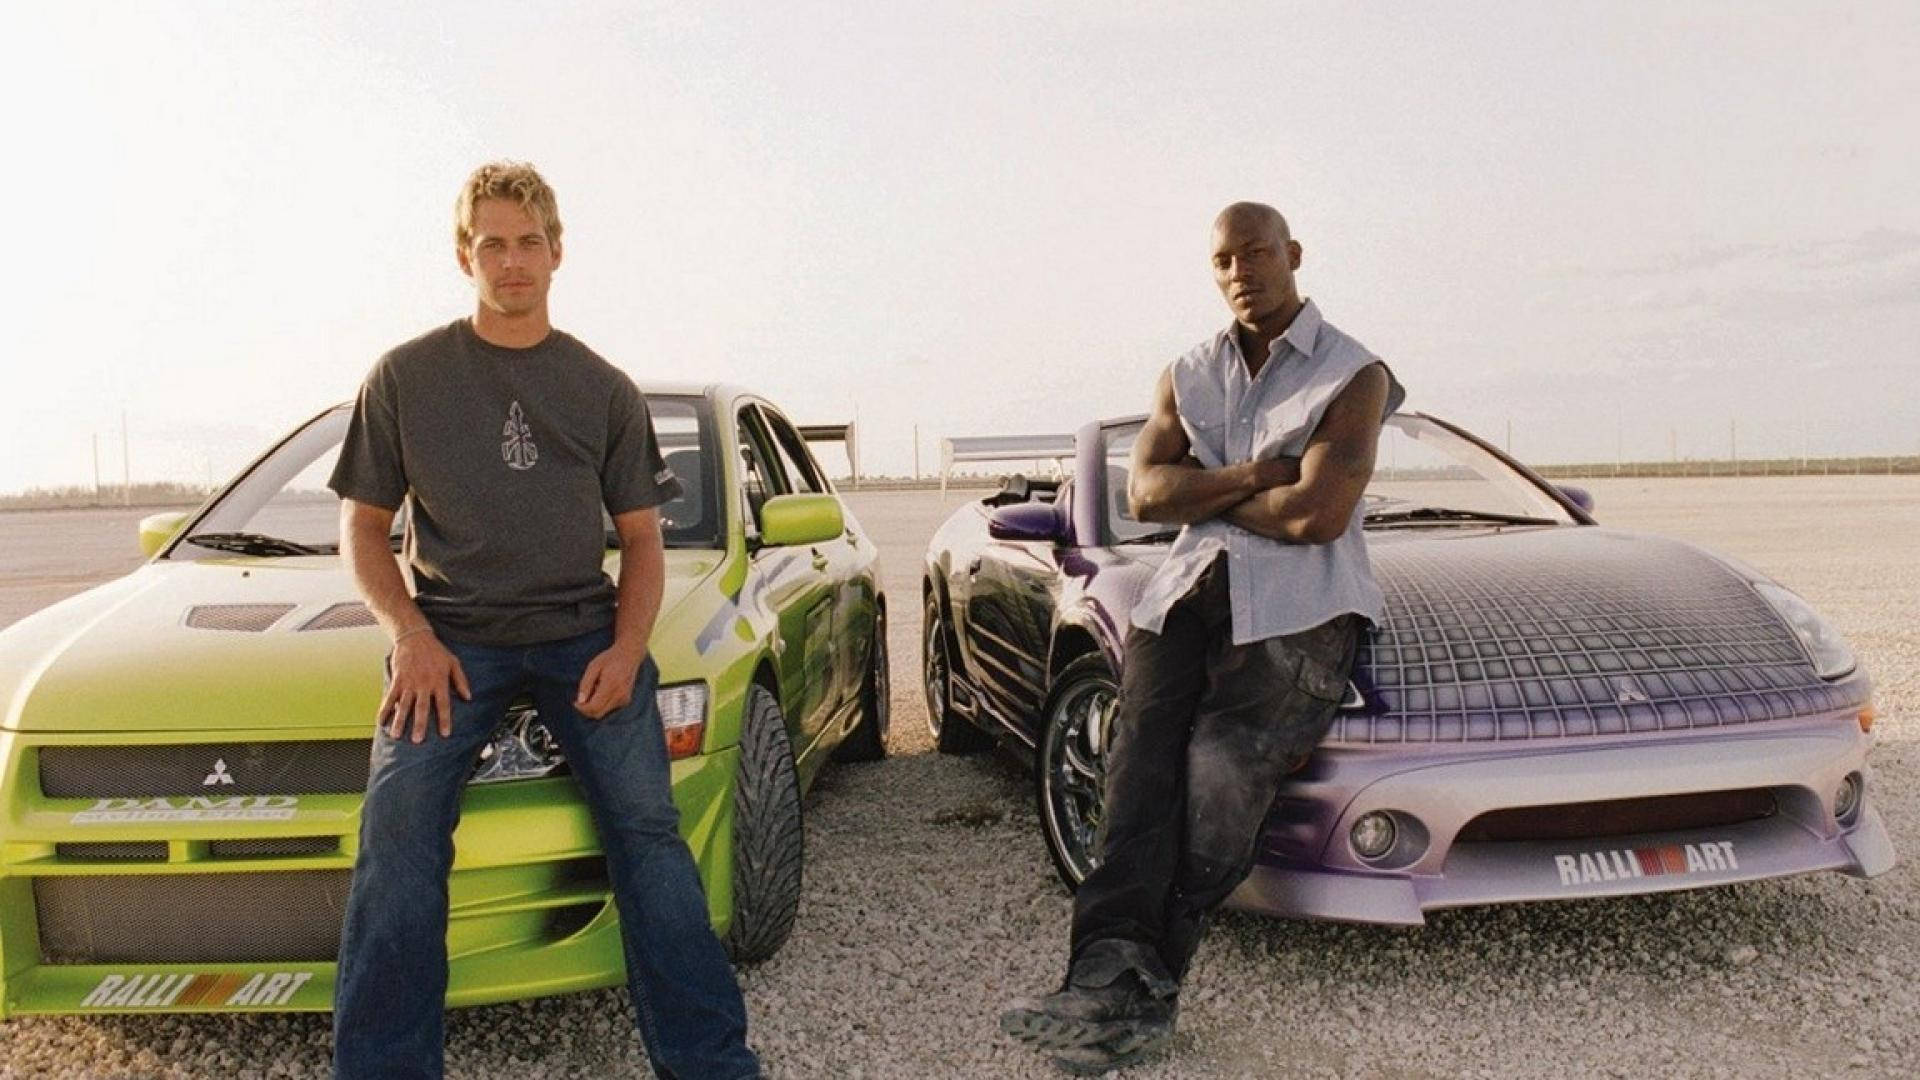 1920X1080 Fast And Furious Wallpaper and Background